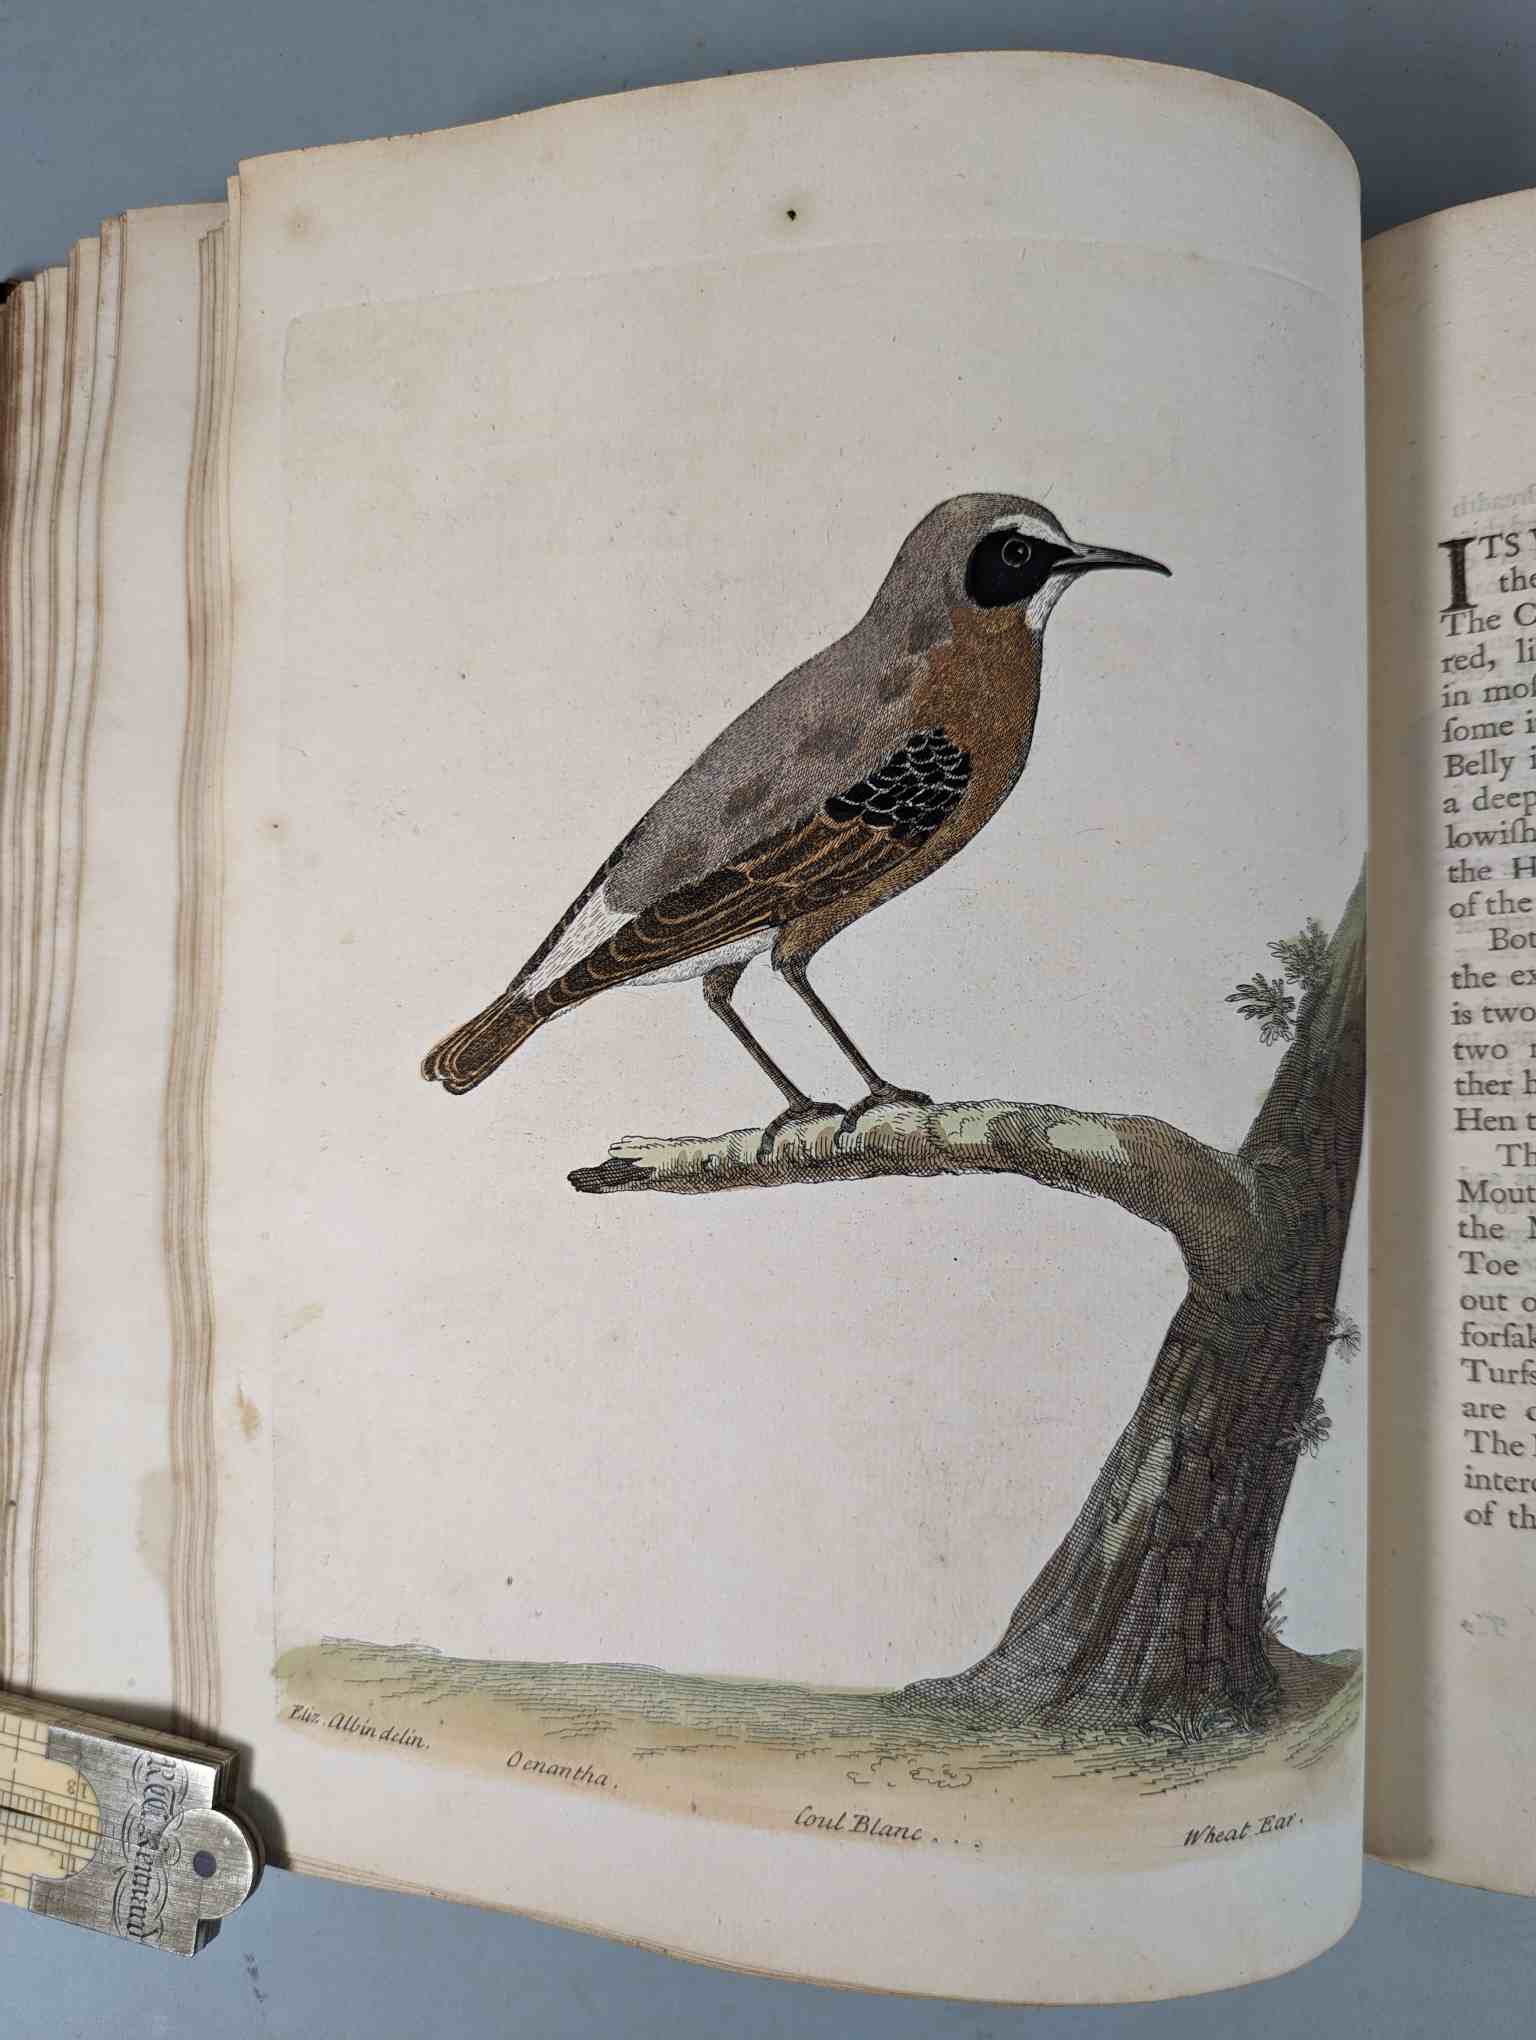 ALBIN, Eleazar. A Natural History of Birds, to which are added, Notes and Observations by W. - Image 58 of 208